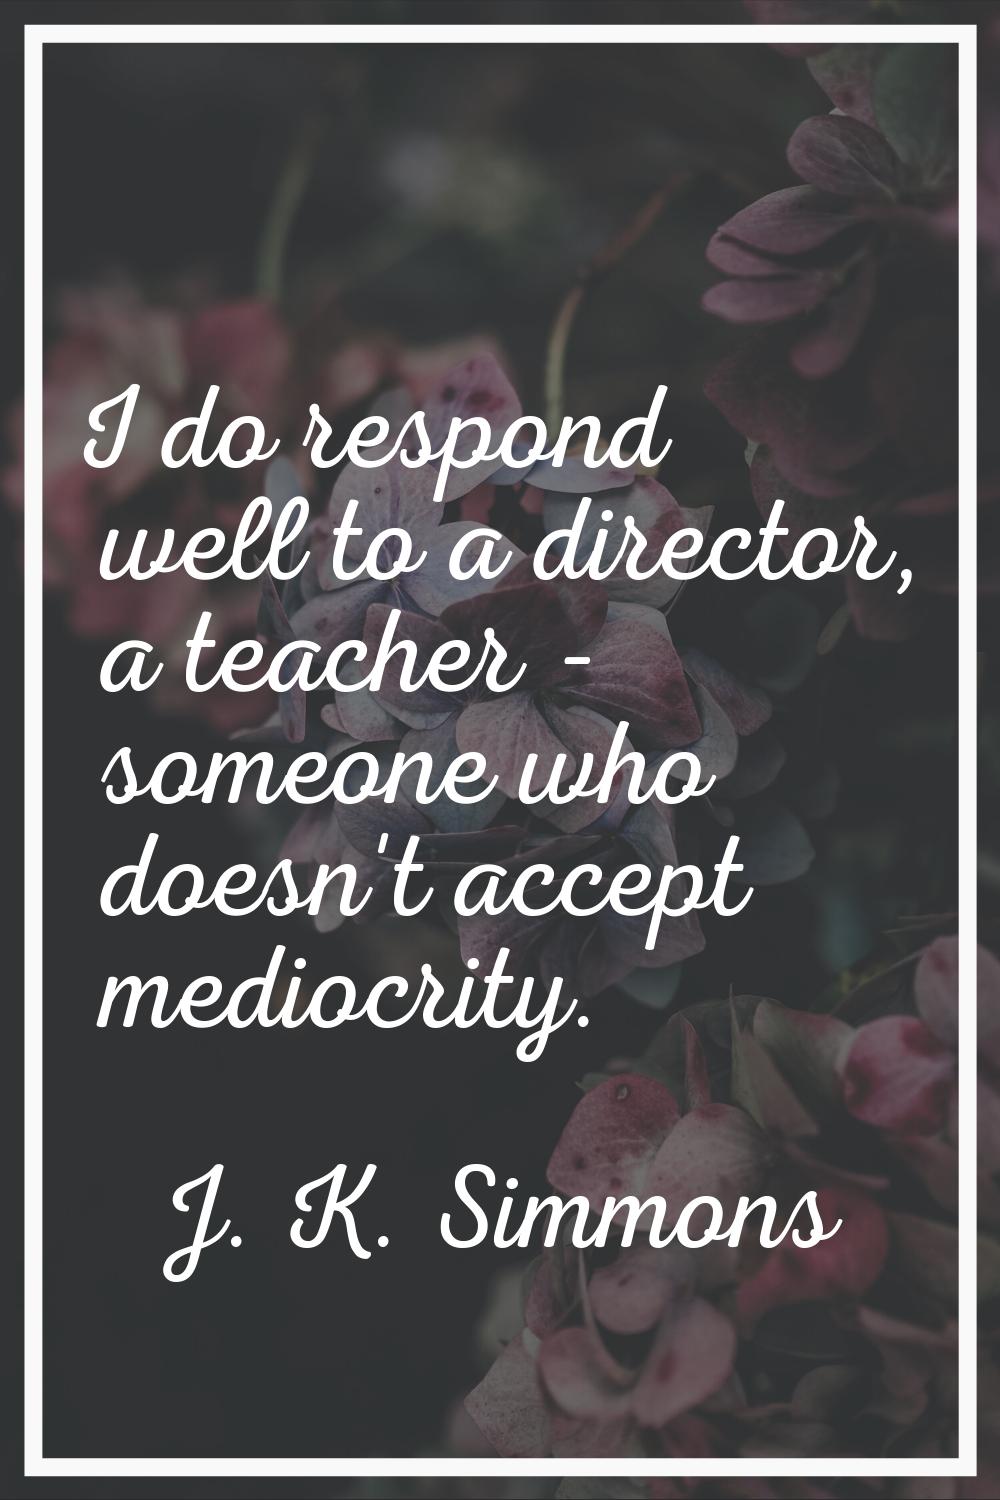 I do respond well to a director, a teacher - someone who doesn't accept mediocrity.